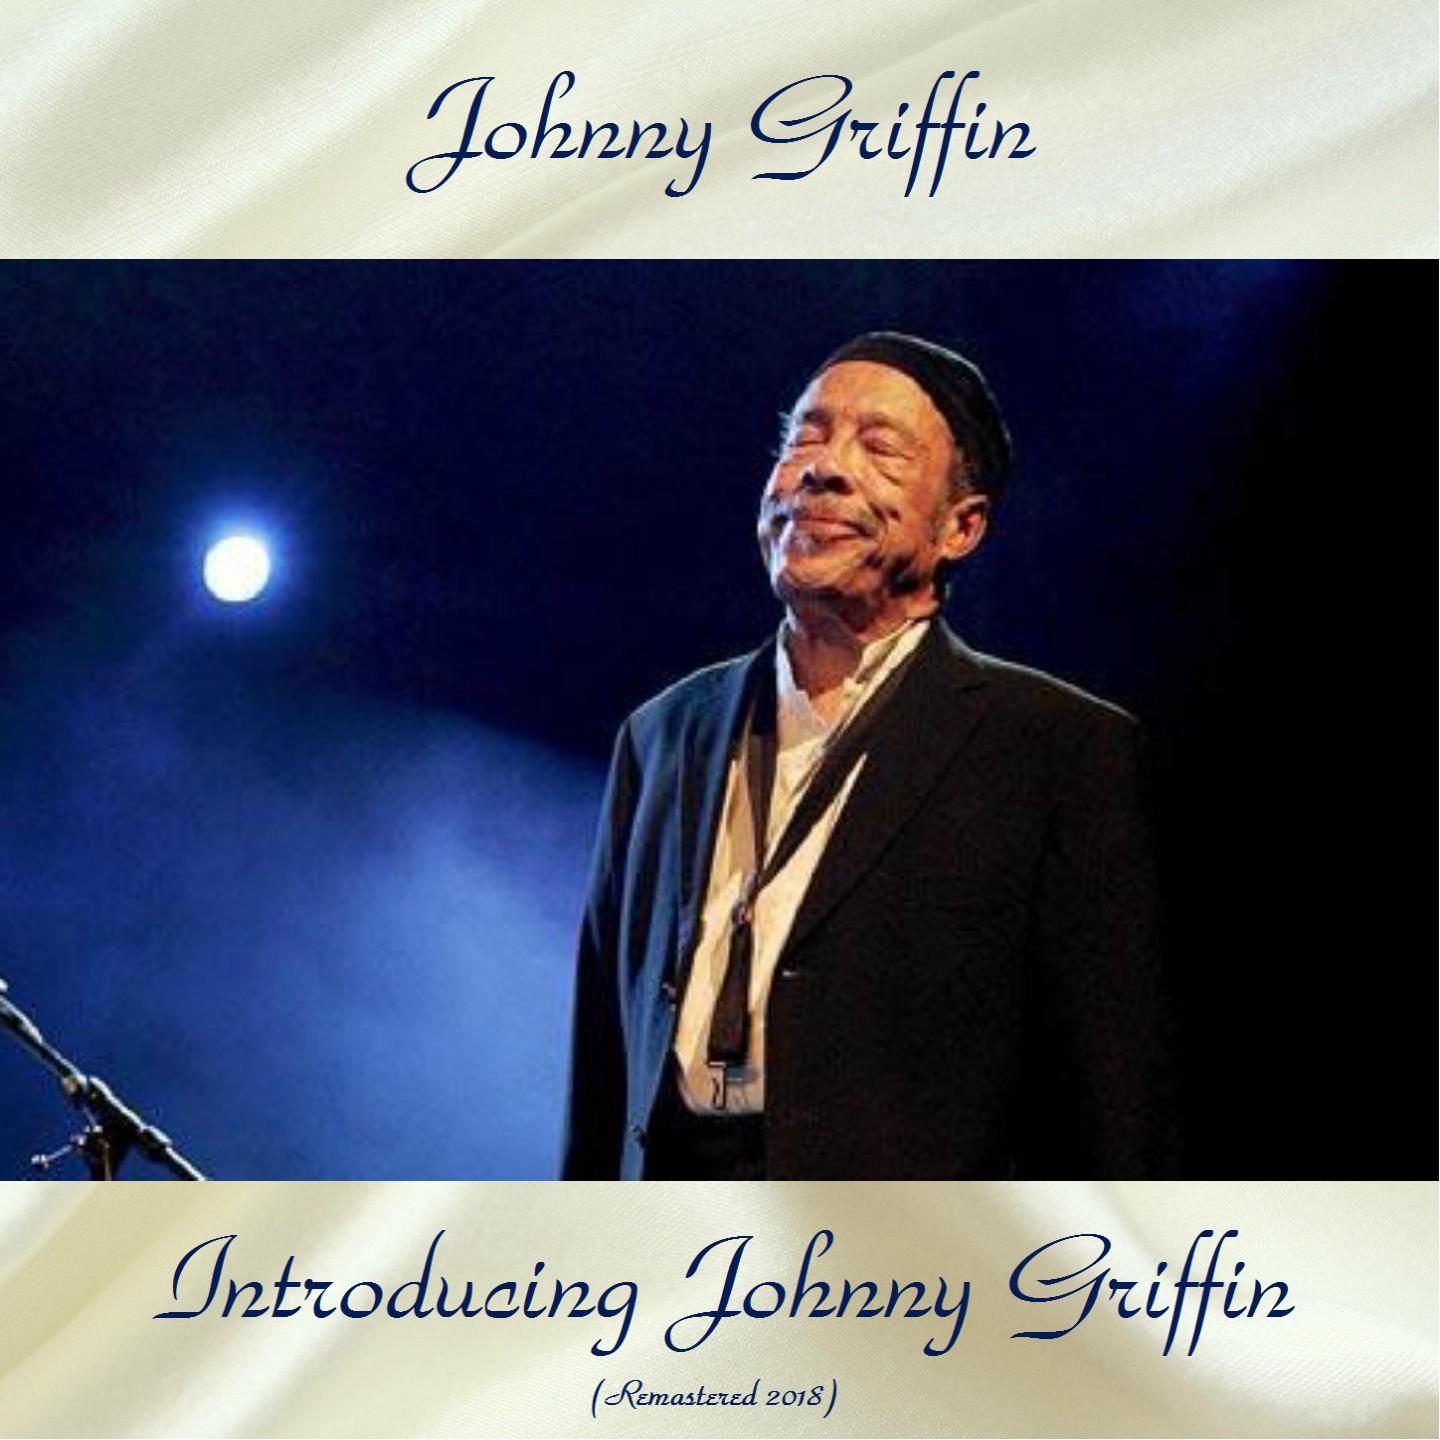 Introducing Johnny Griffin (Remastered 2018)